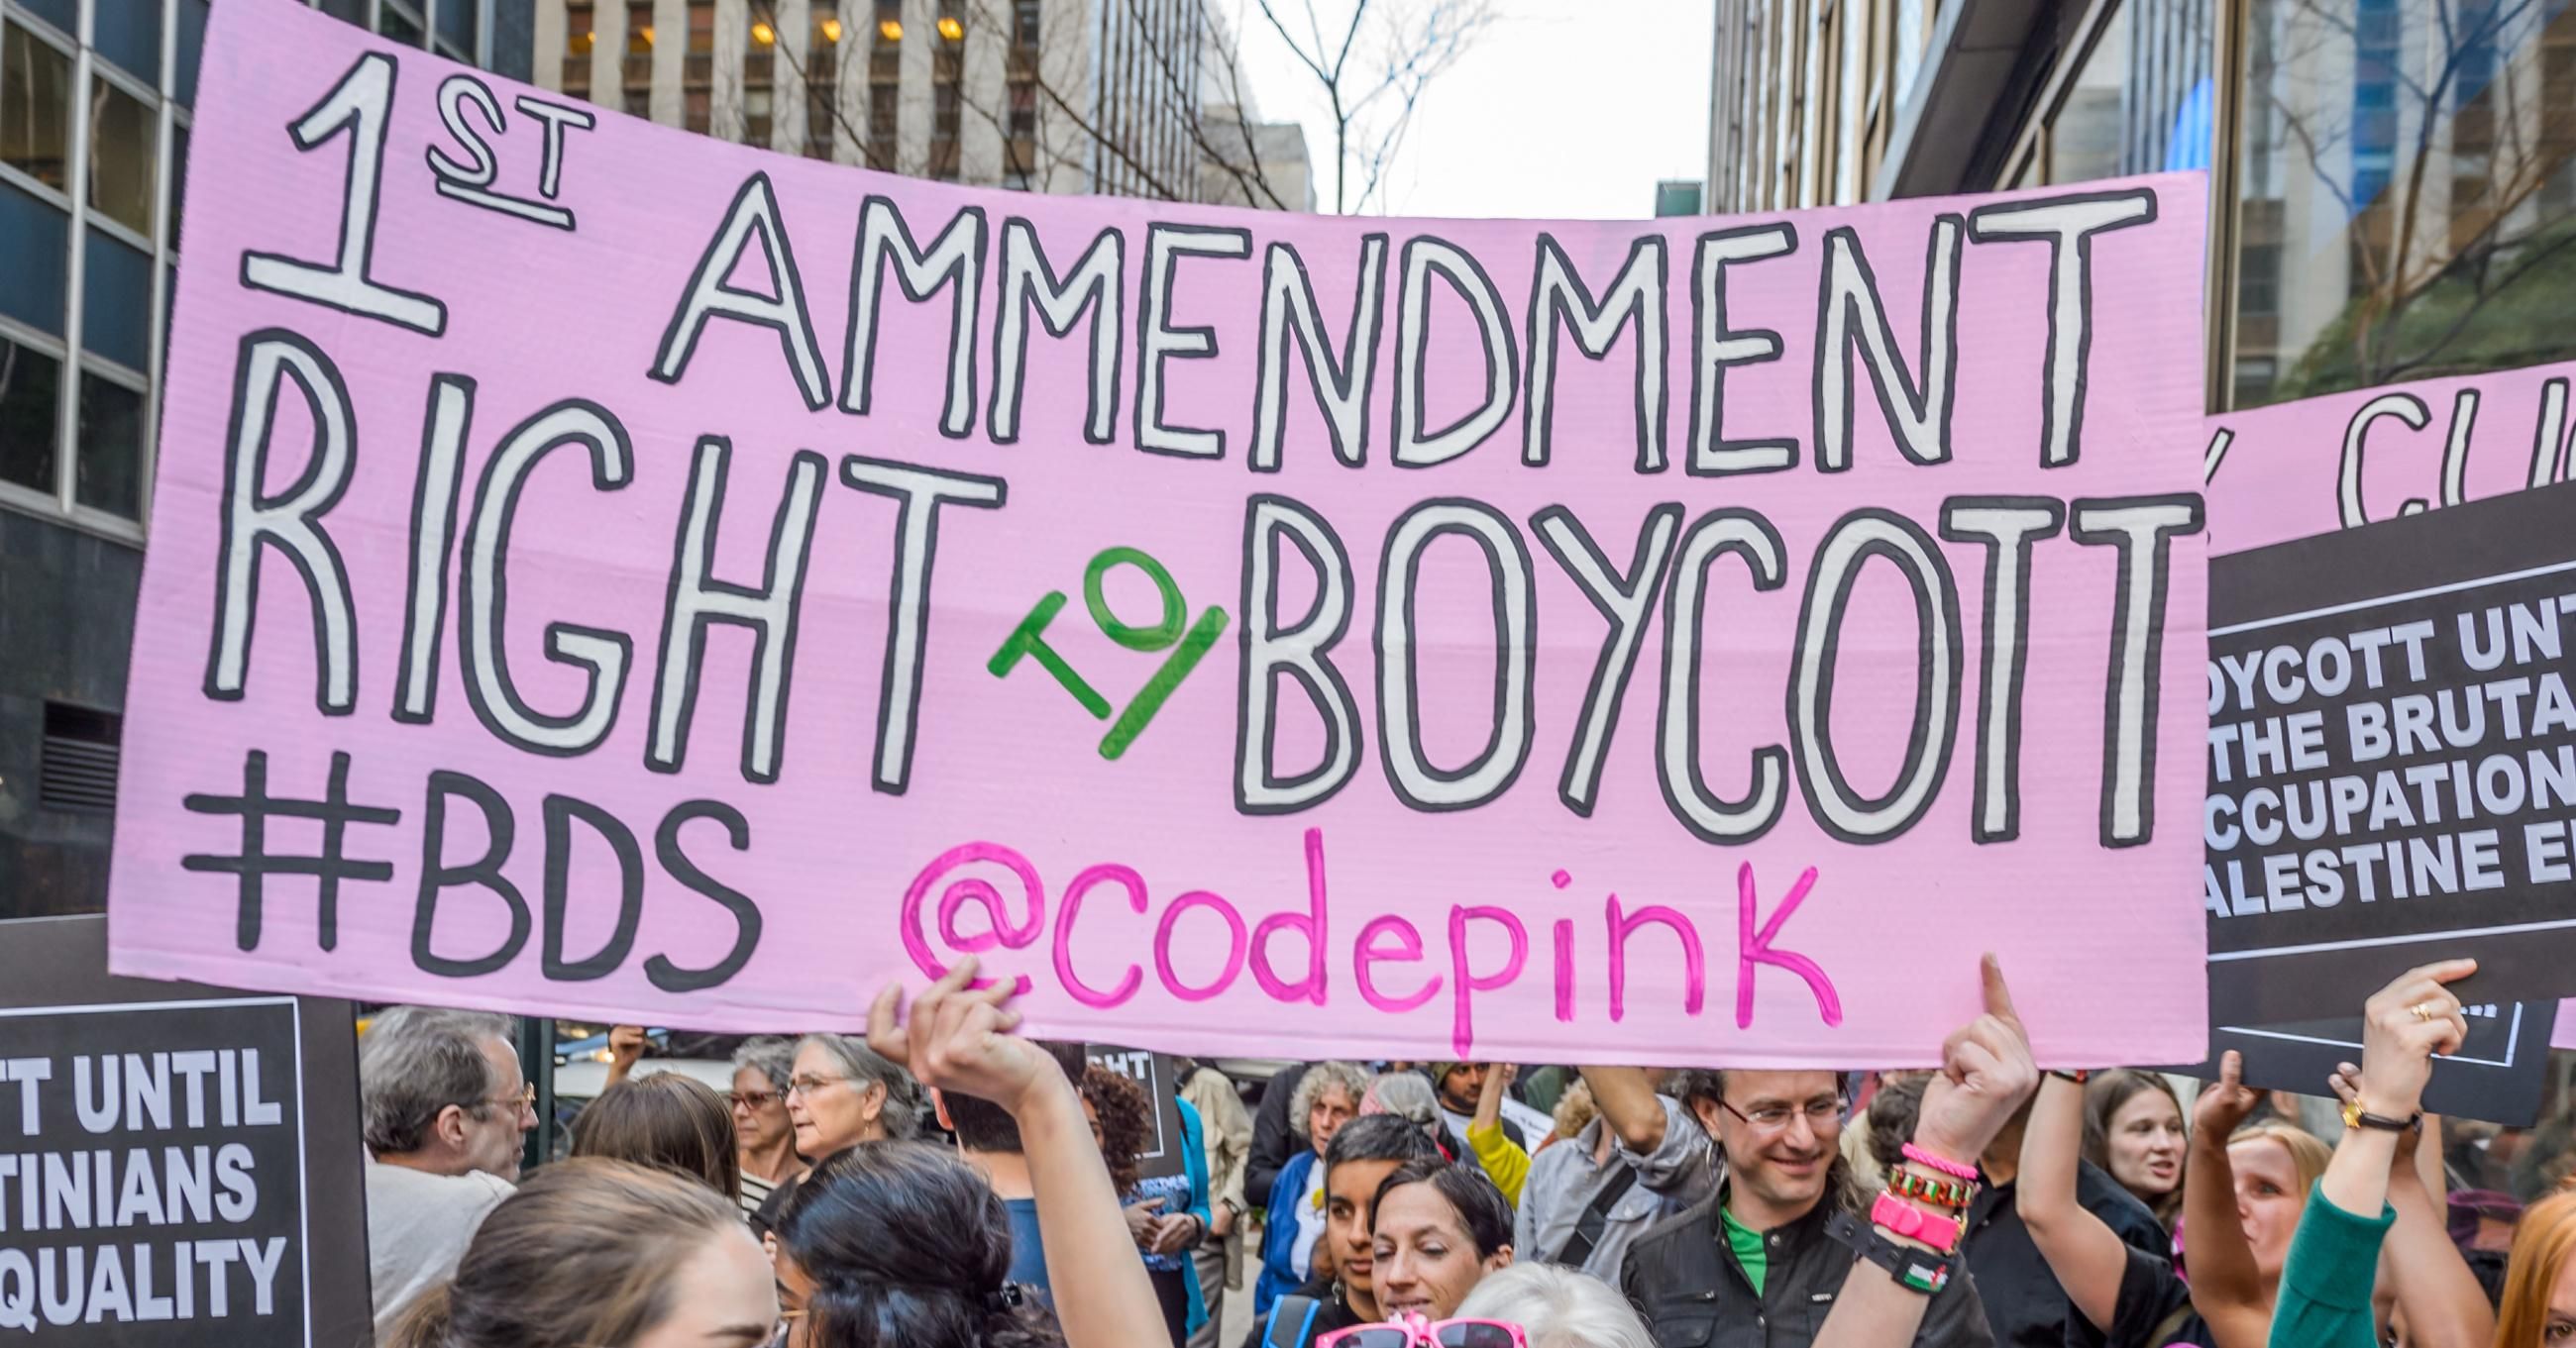 A protester holds up a sign affirming the constitutional right to boycott at a June 9, 2016 demonstration against New York Gov. Andrew Cuomo's executive order requiring state agencies to divest from organizations supporting boycotts of Israel. (Photo: Erik McGregor/LightRocket via Getty Images) 